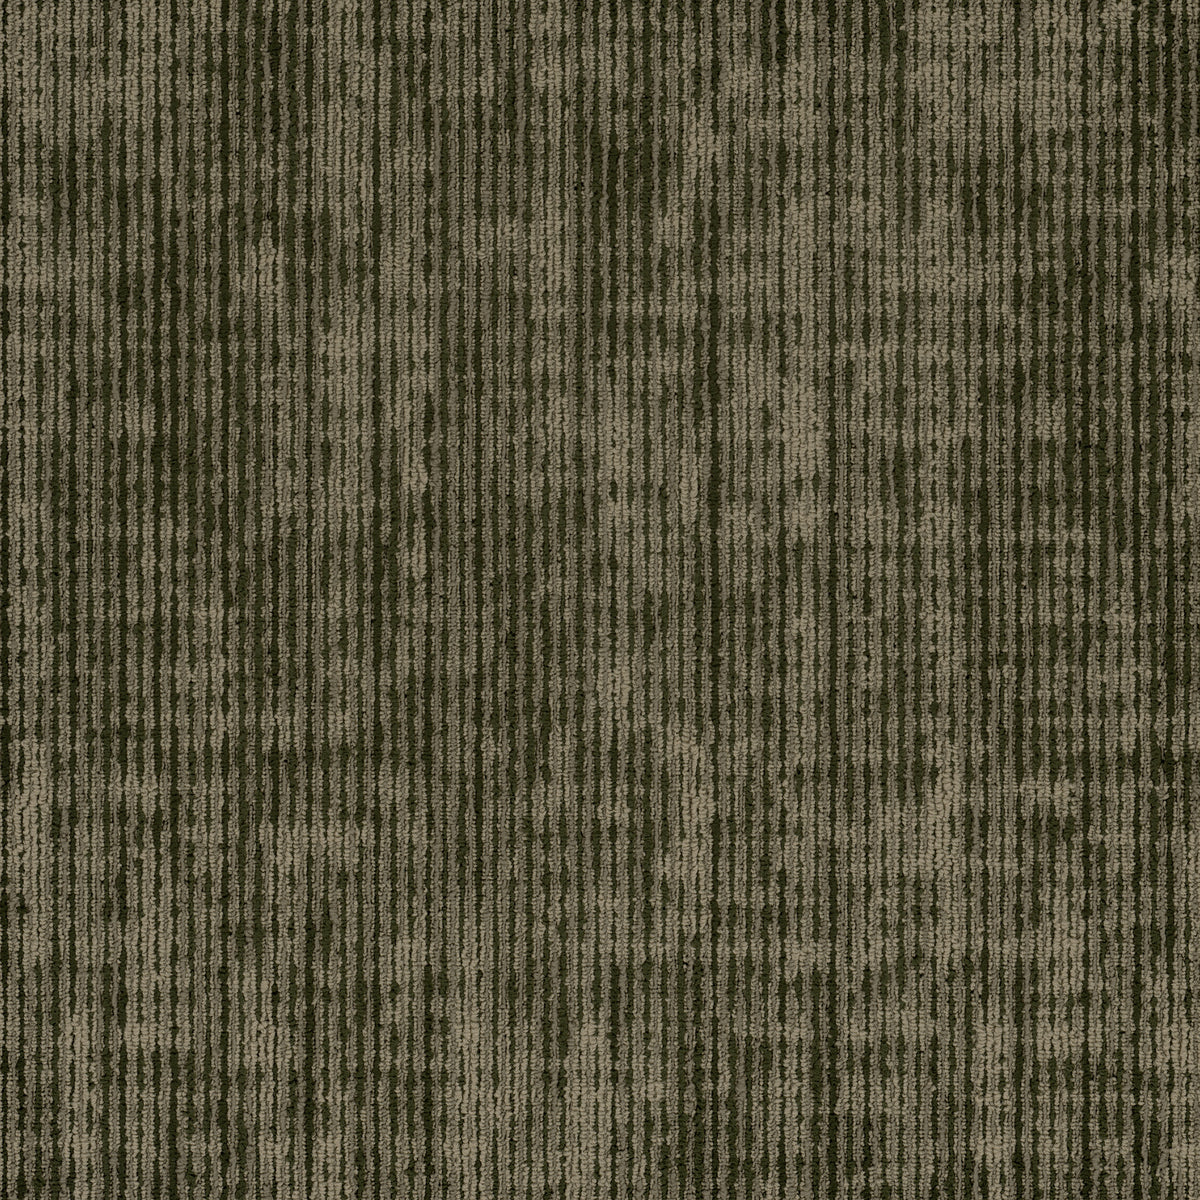 Mohawk Group - Renewed Outlook - Textural Reconnect - Carpet Tile - Olive Grove